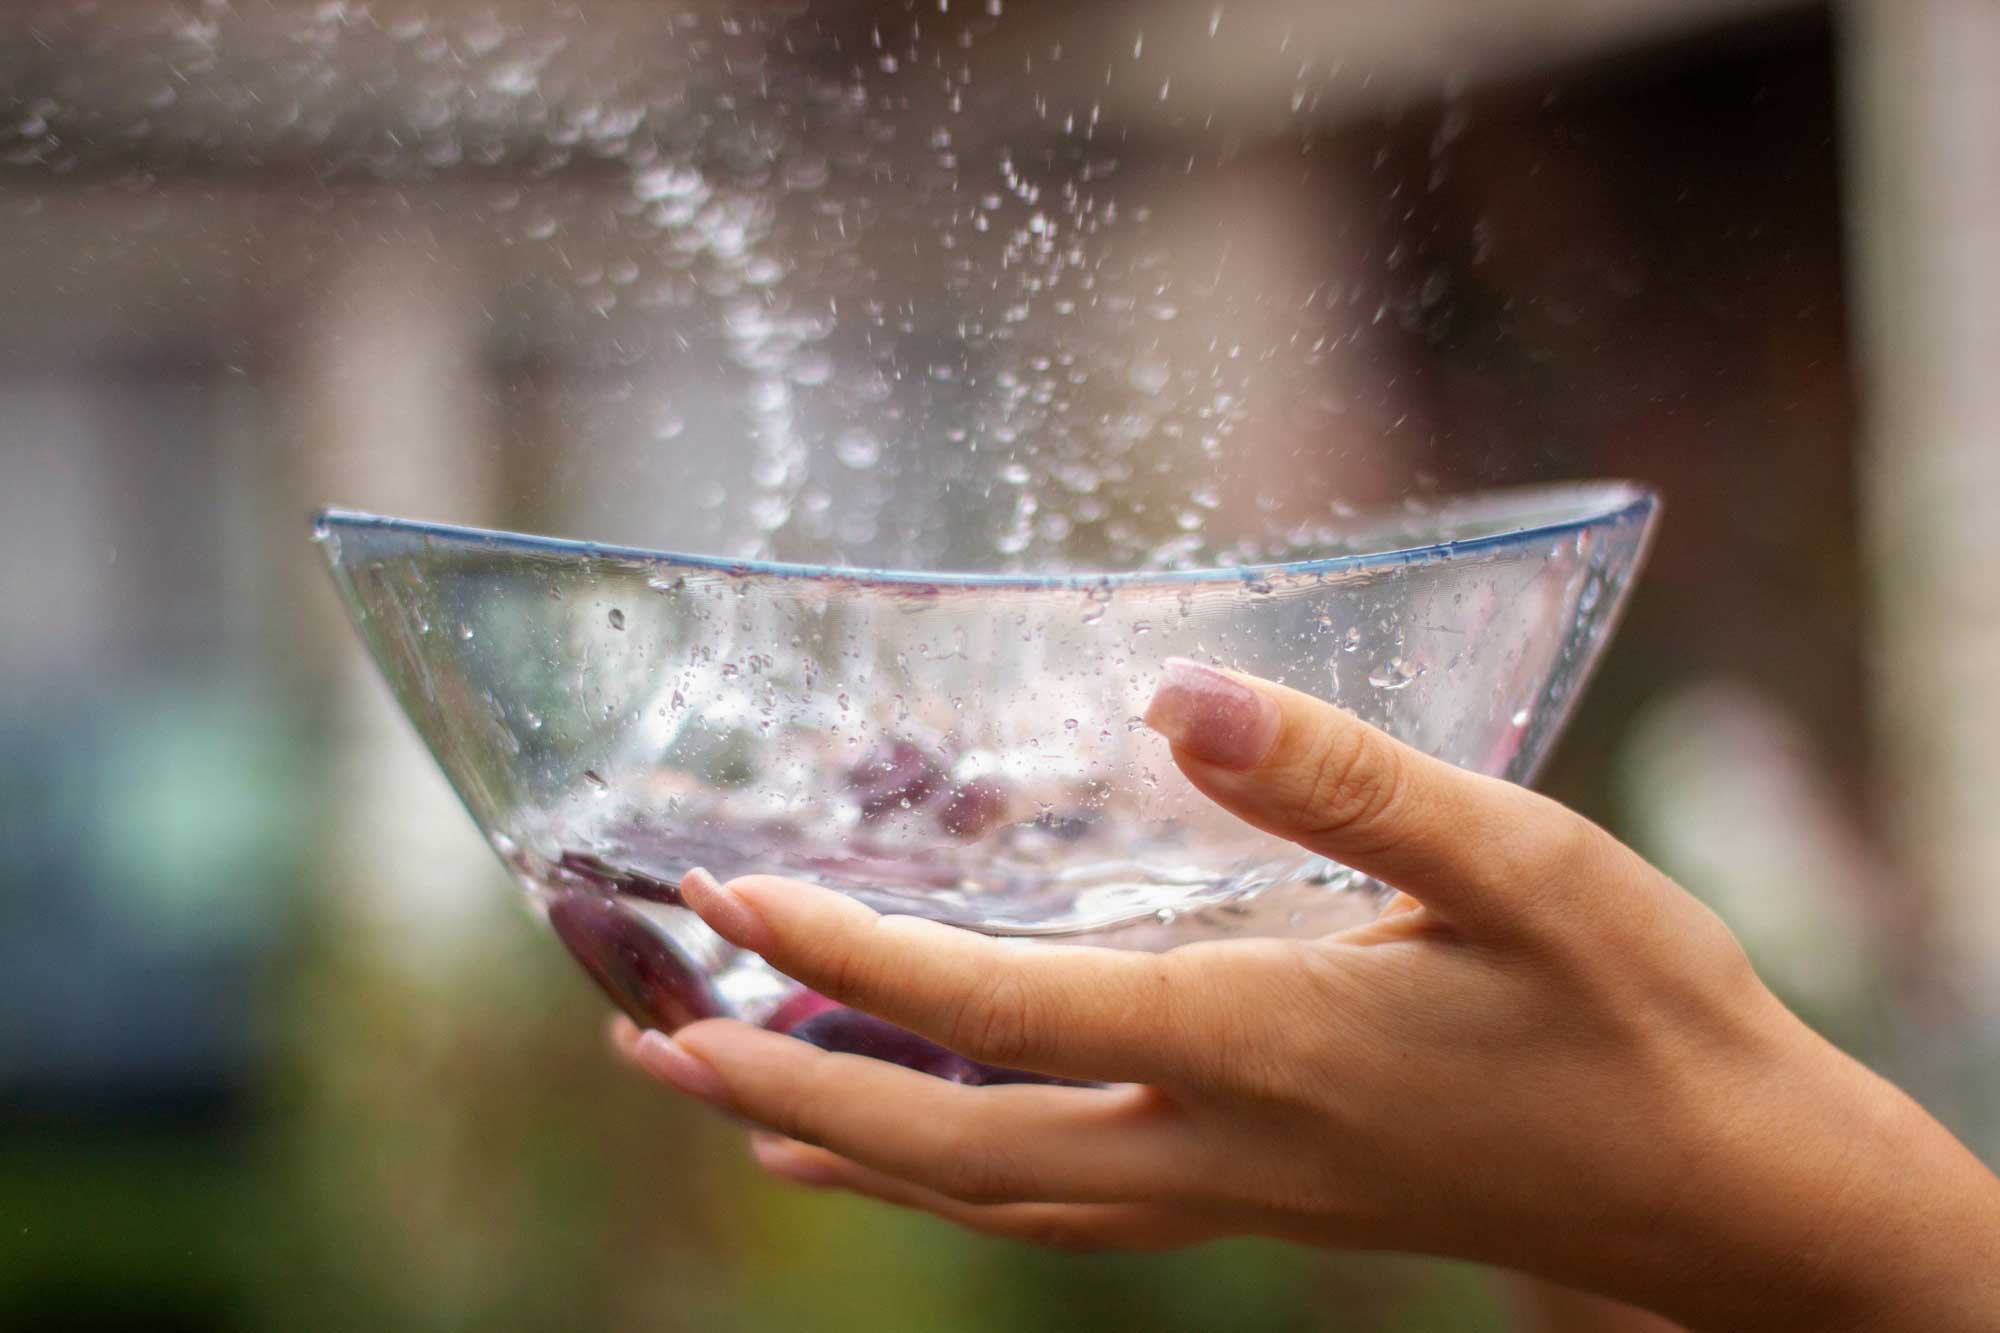 Hands holding a bowl as water splashes into it.